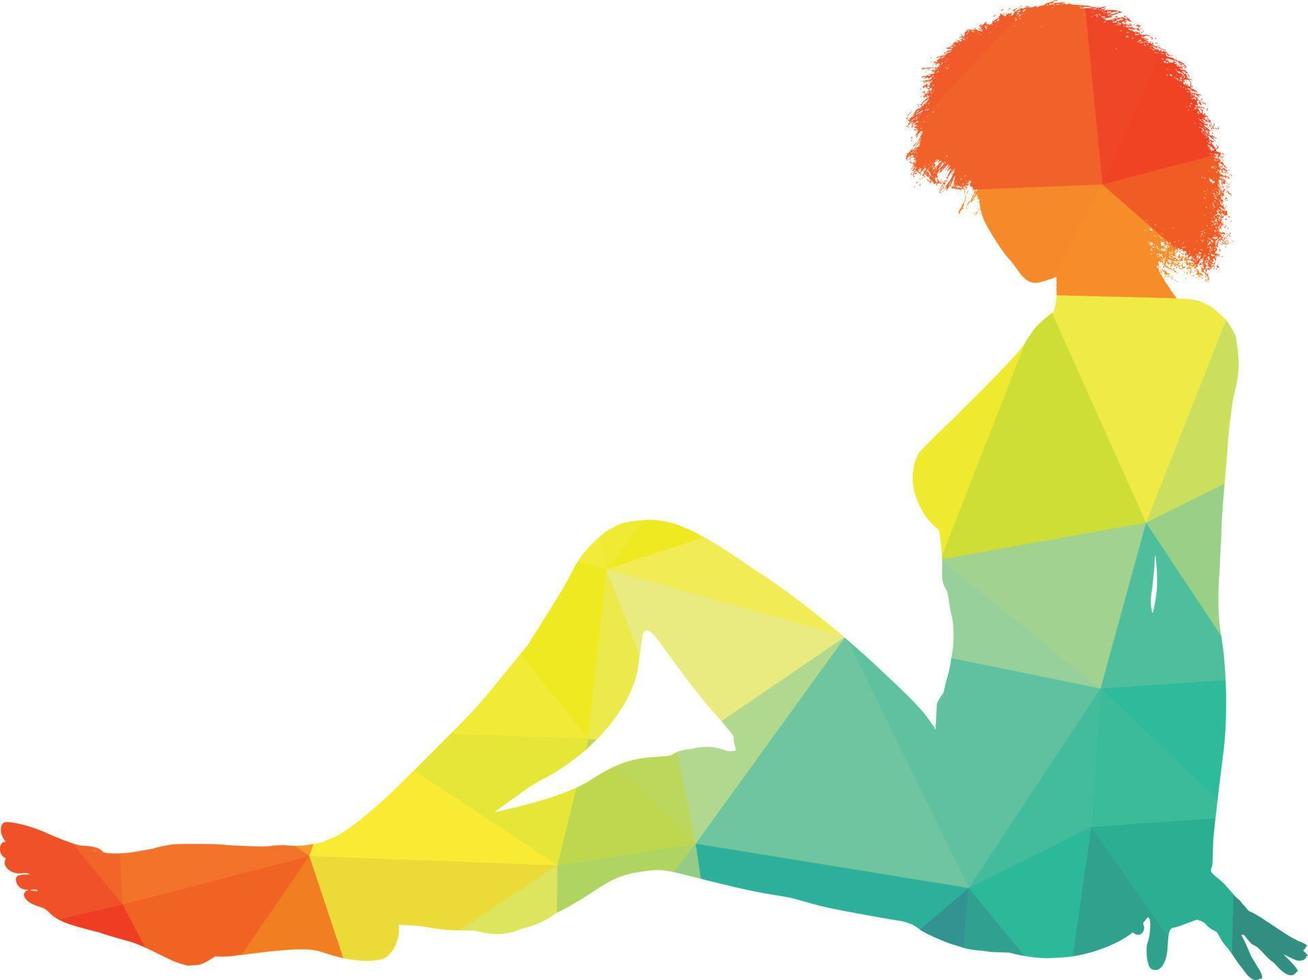 Vector Image Of A Woman Sitting On The Floor